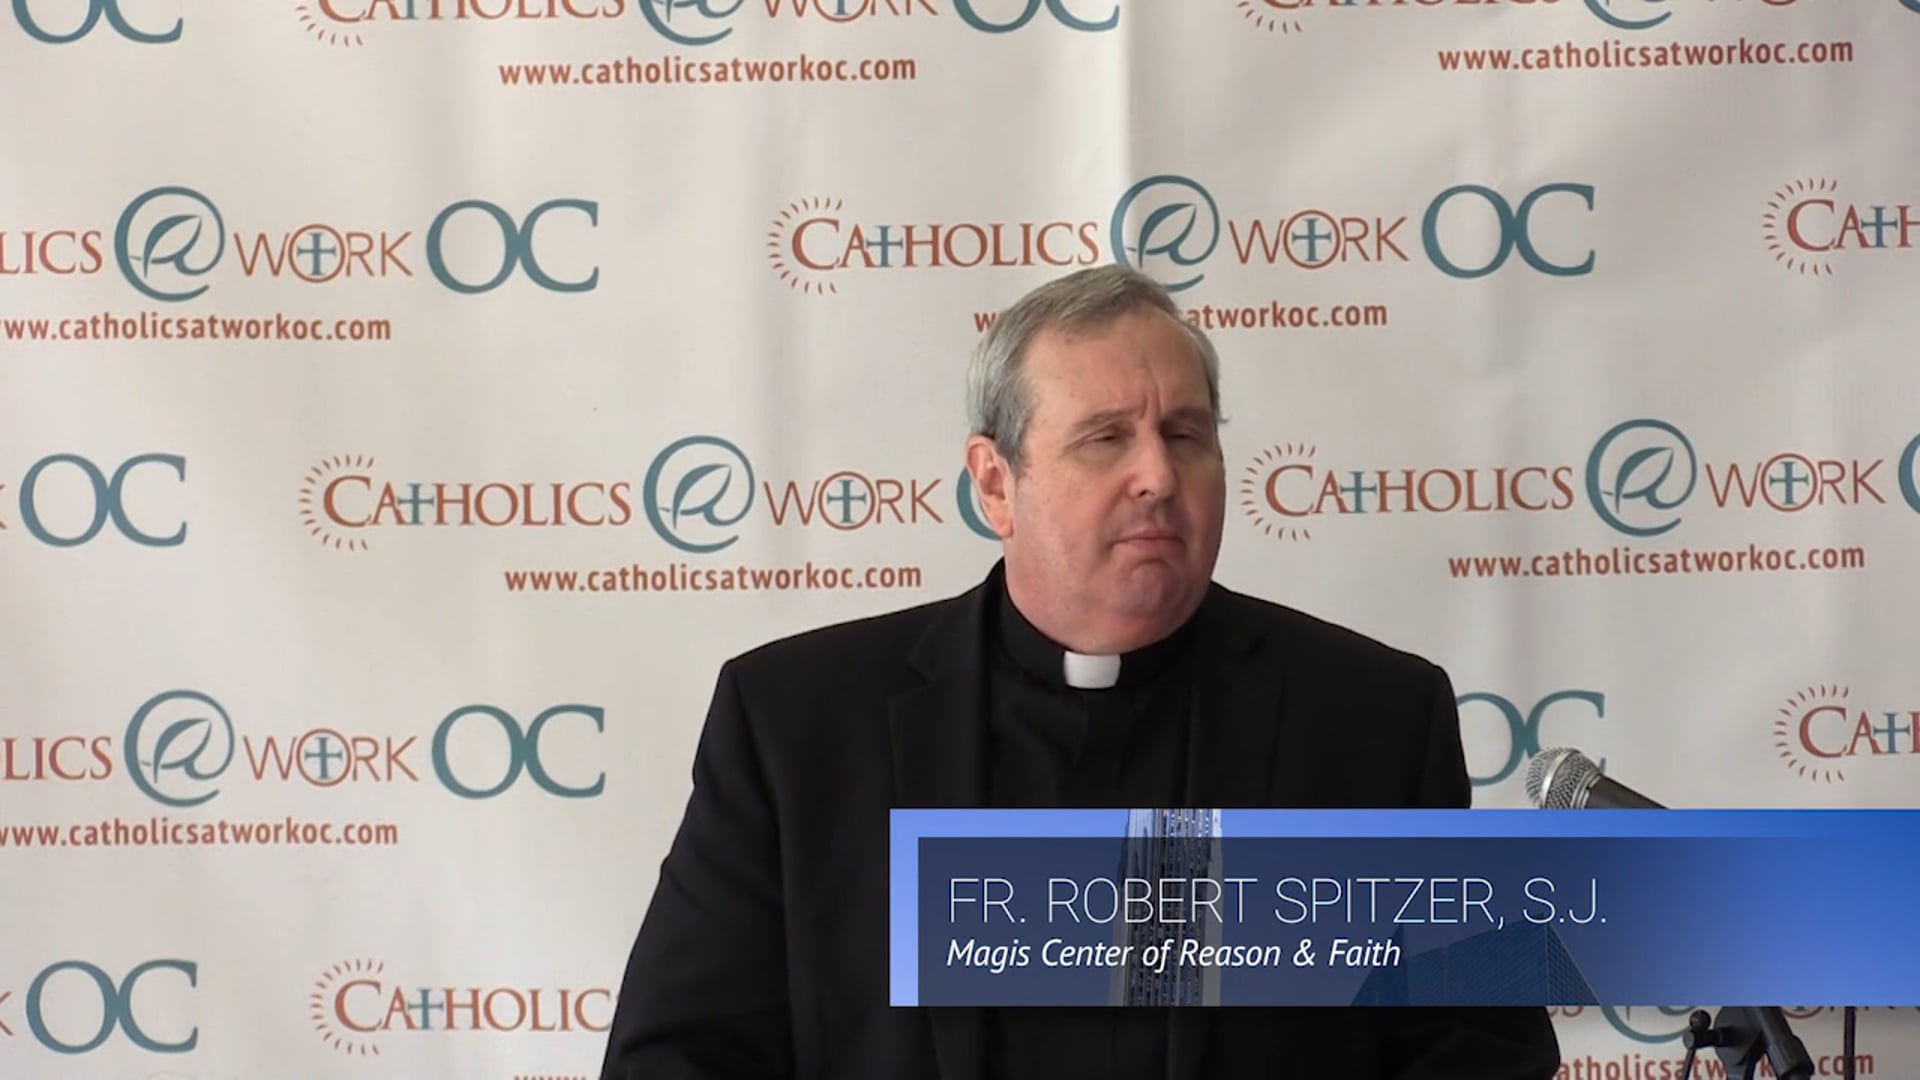 Fr. Robert Spitzer, S.J.: "The Case for Jesus: Science & the Shroud of Turin"